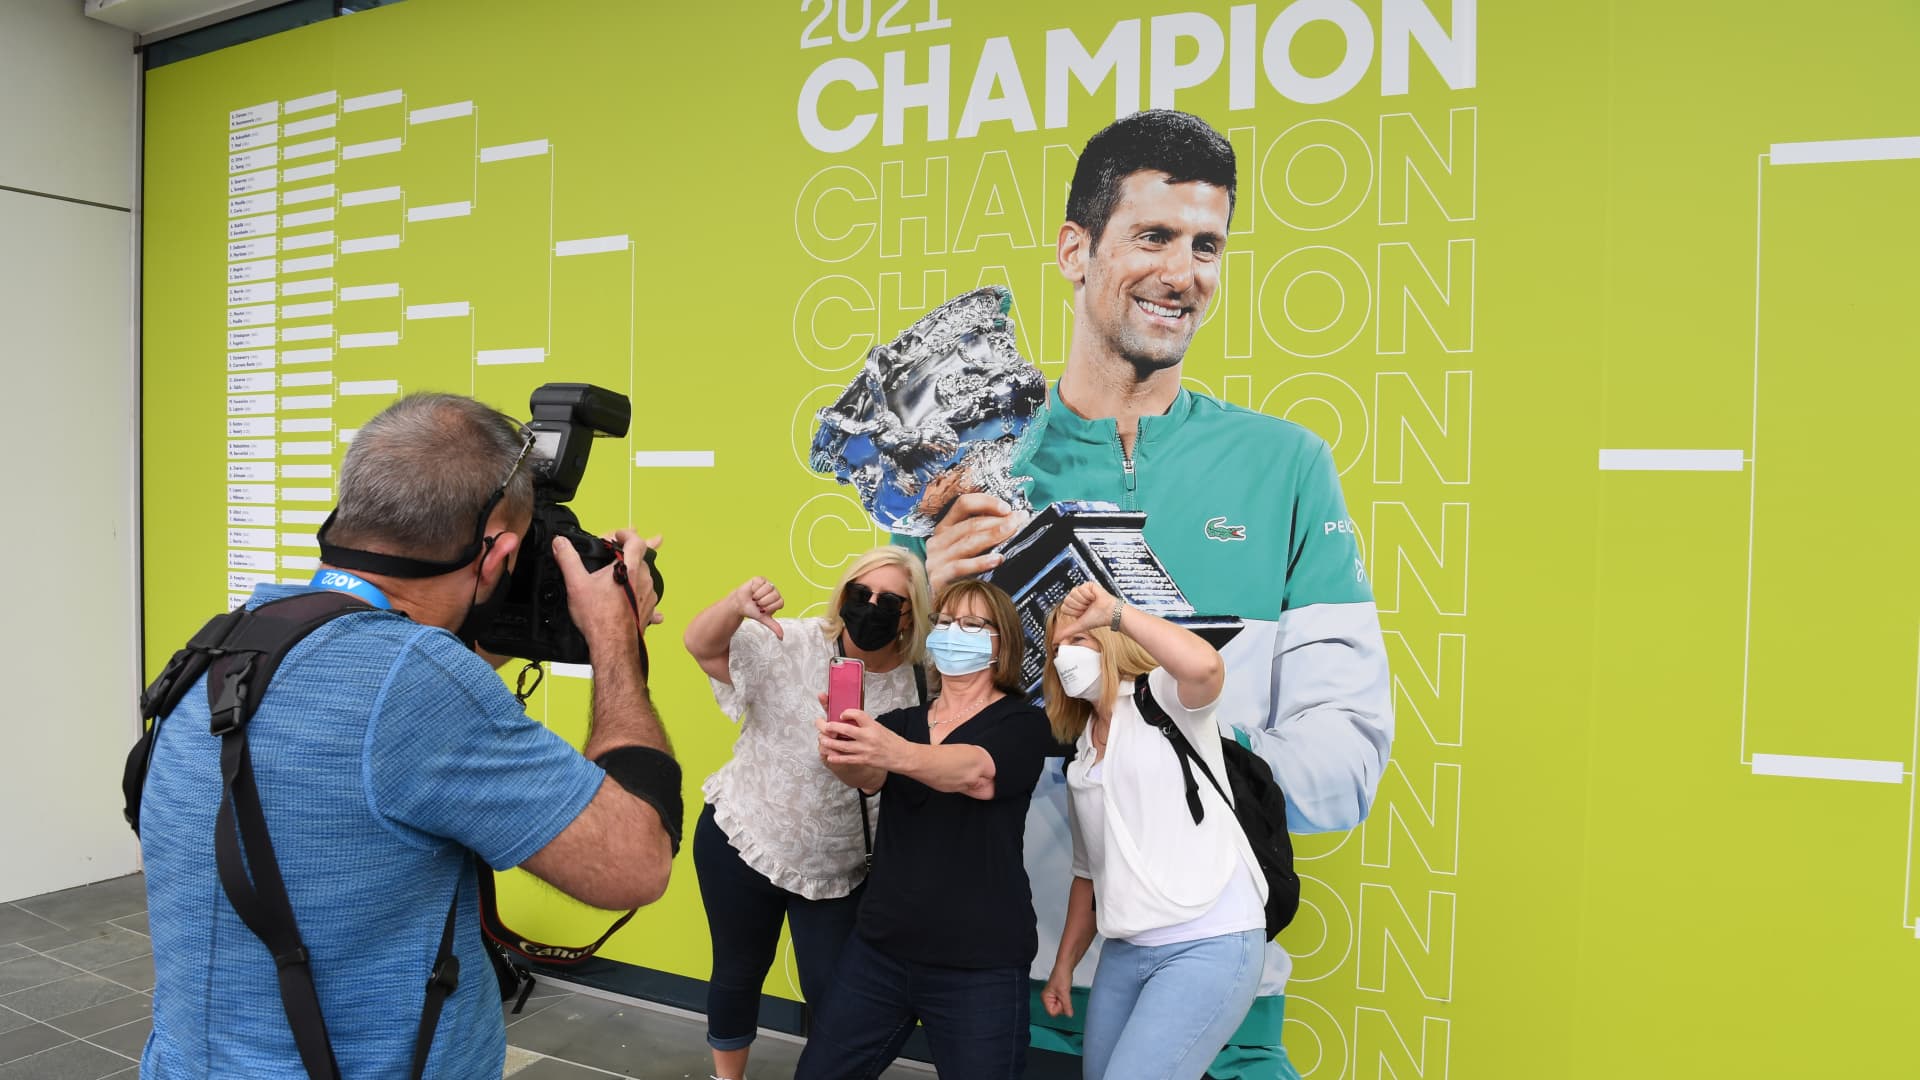 Visitors to Australia must be vaccinated, a requirement underscored by the country's much discussed ouster of tennis player Novak Djokovic in January.